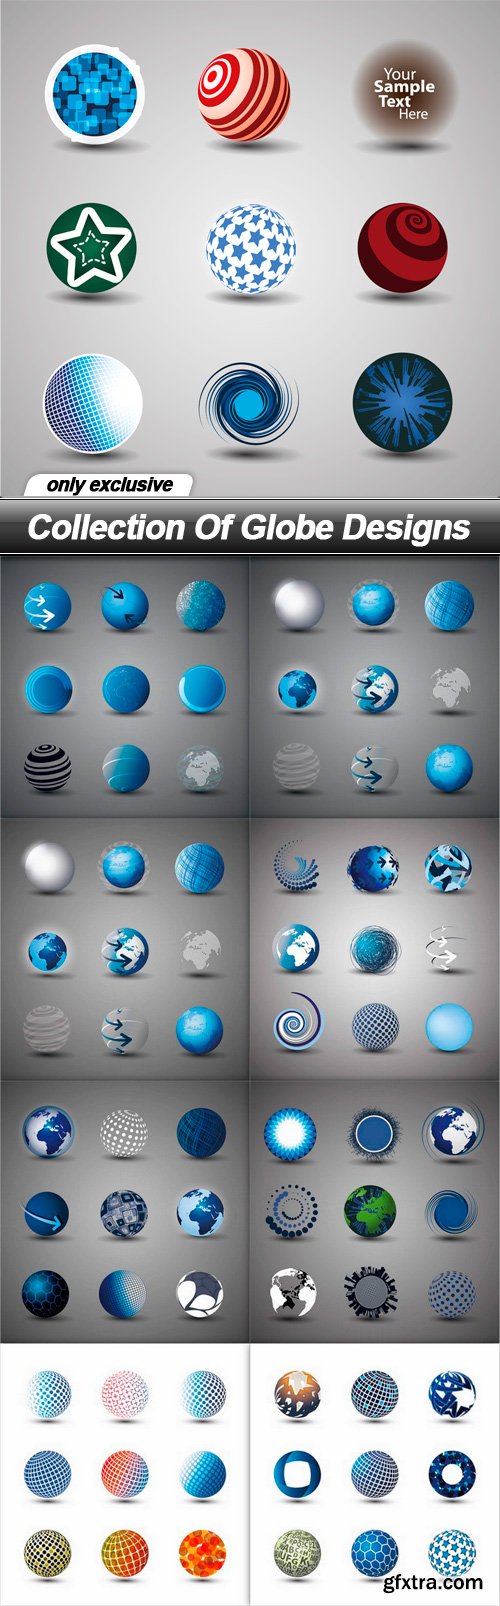 Collection Of Globe Designs - 9 EPS